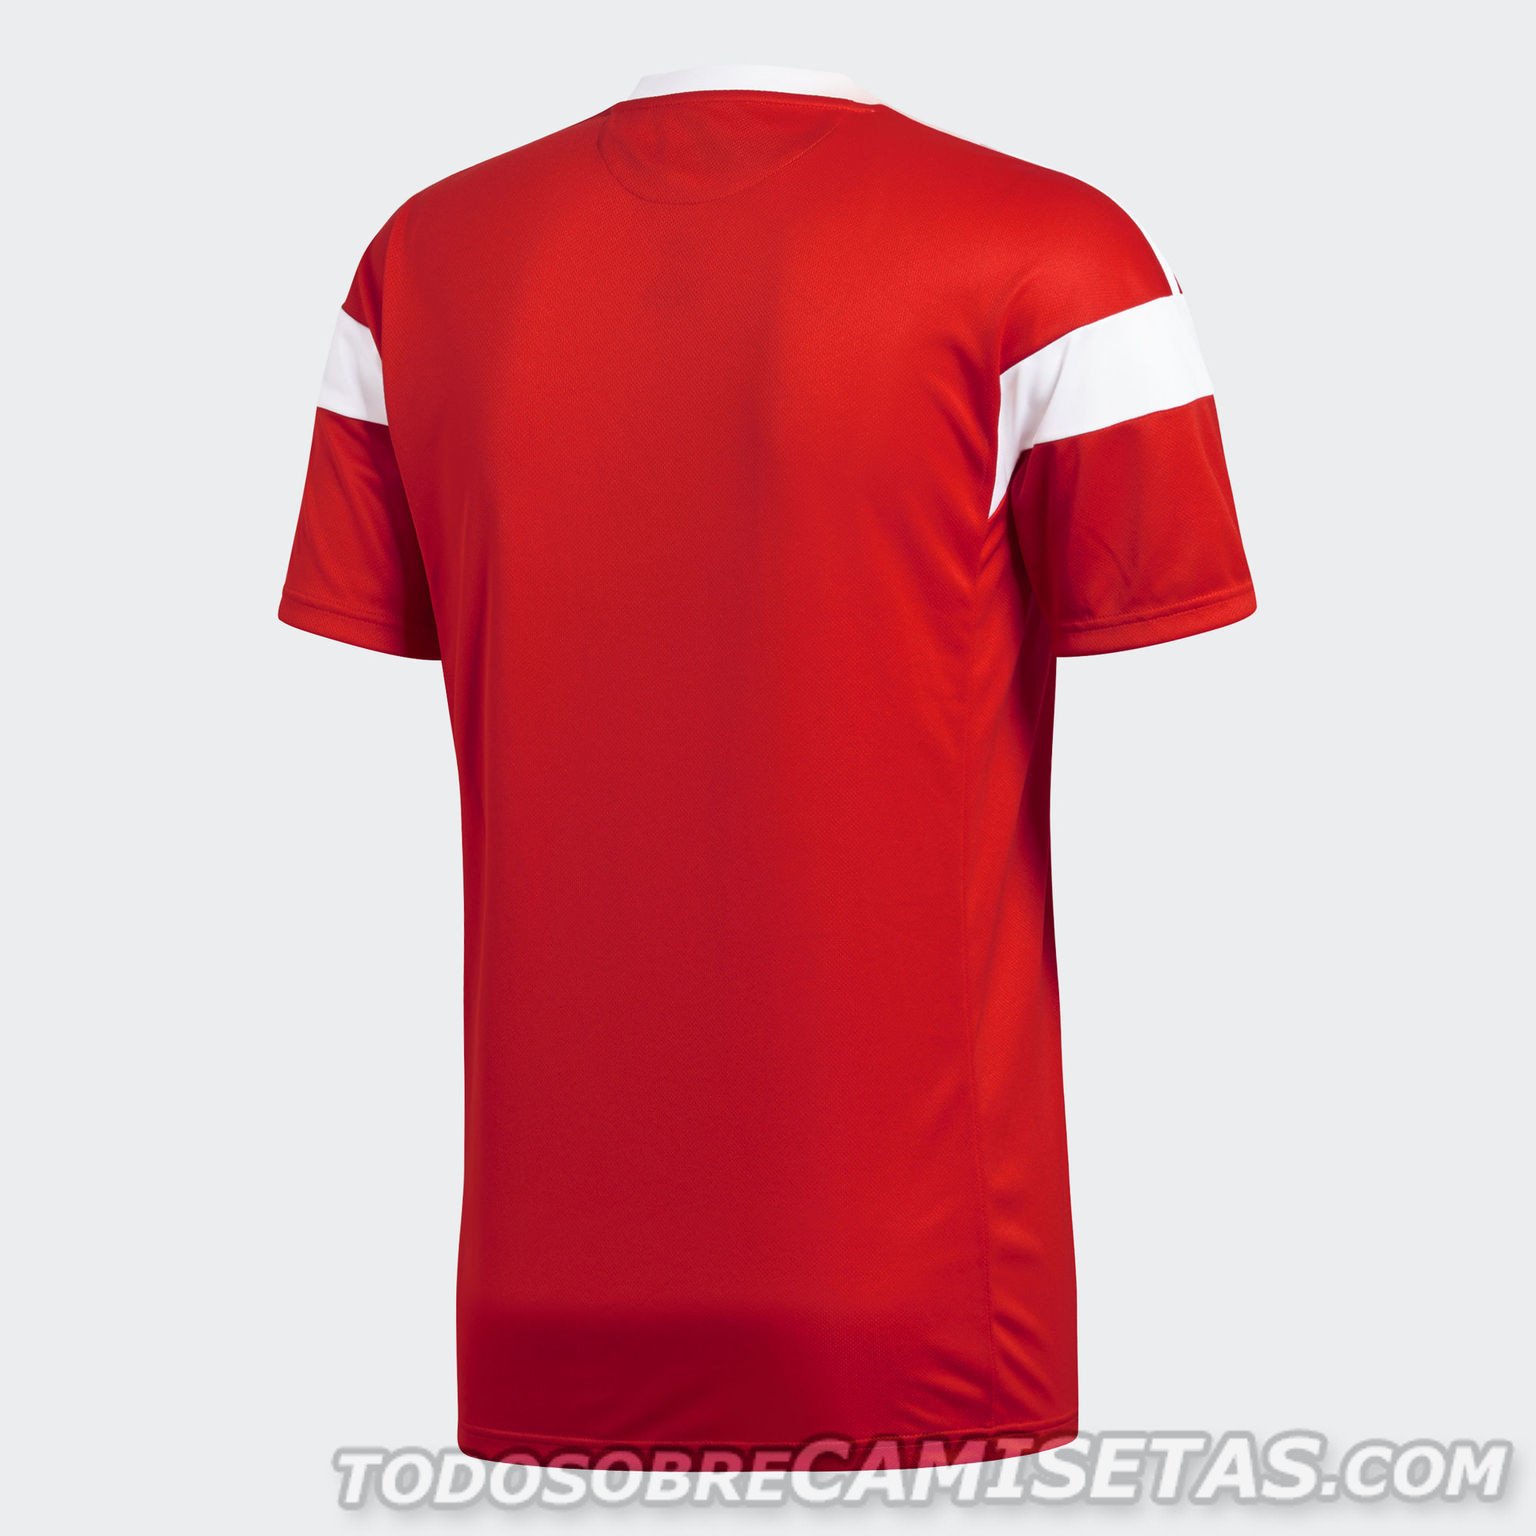 Russia 2018 World Cup adidas Kit